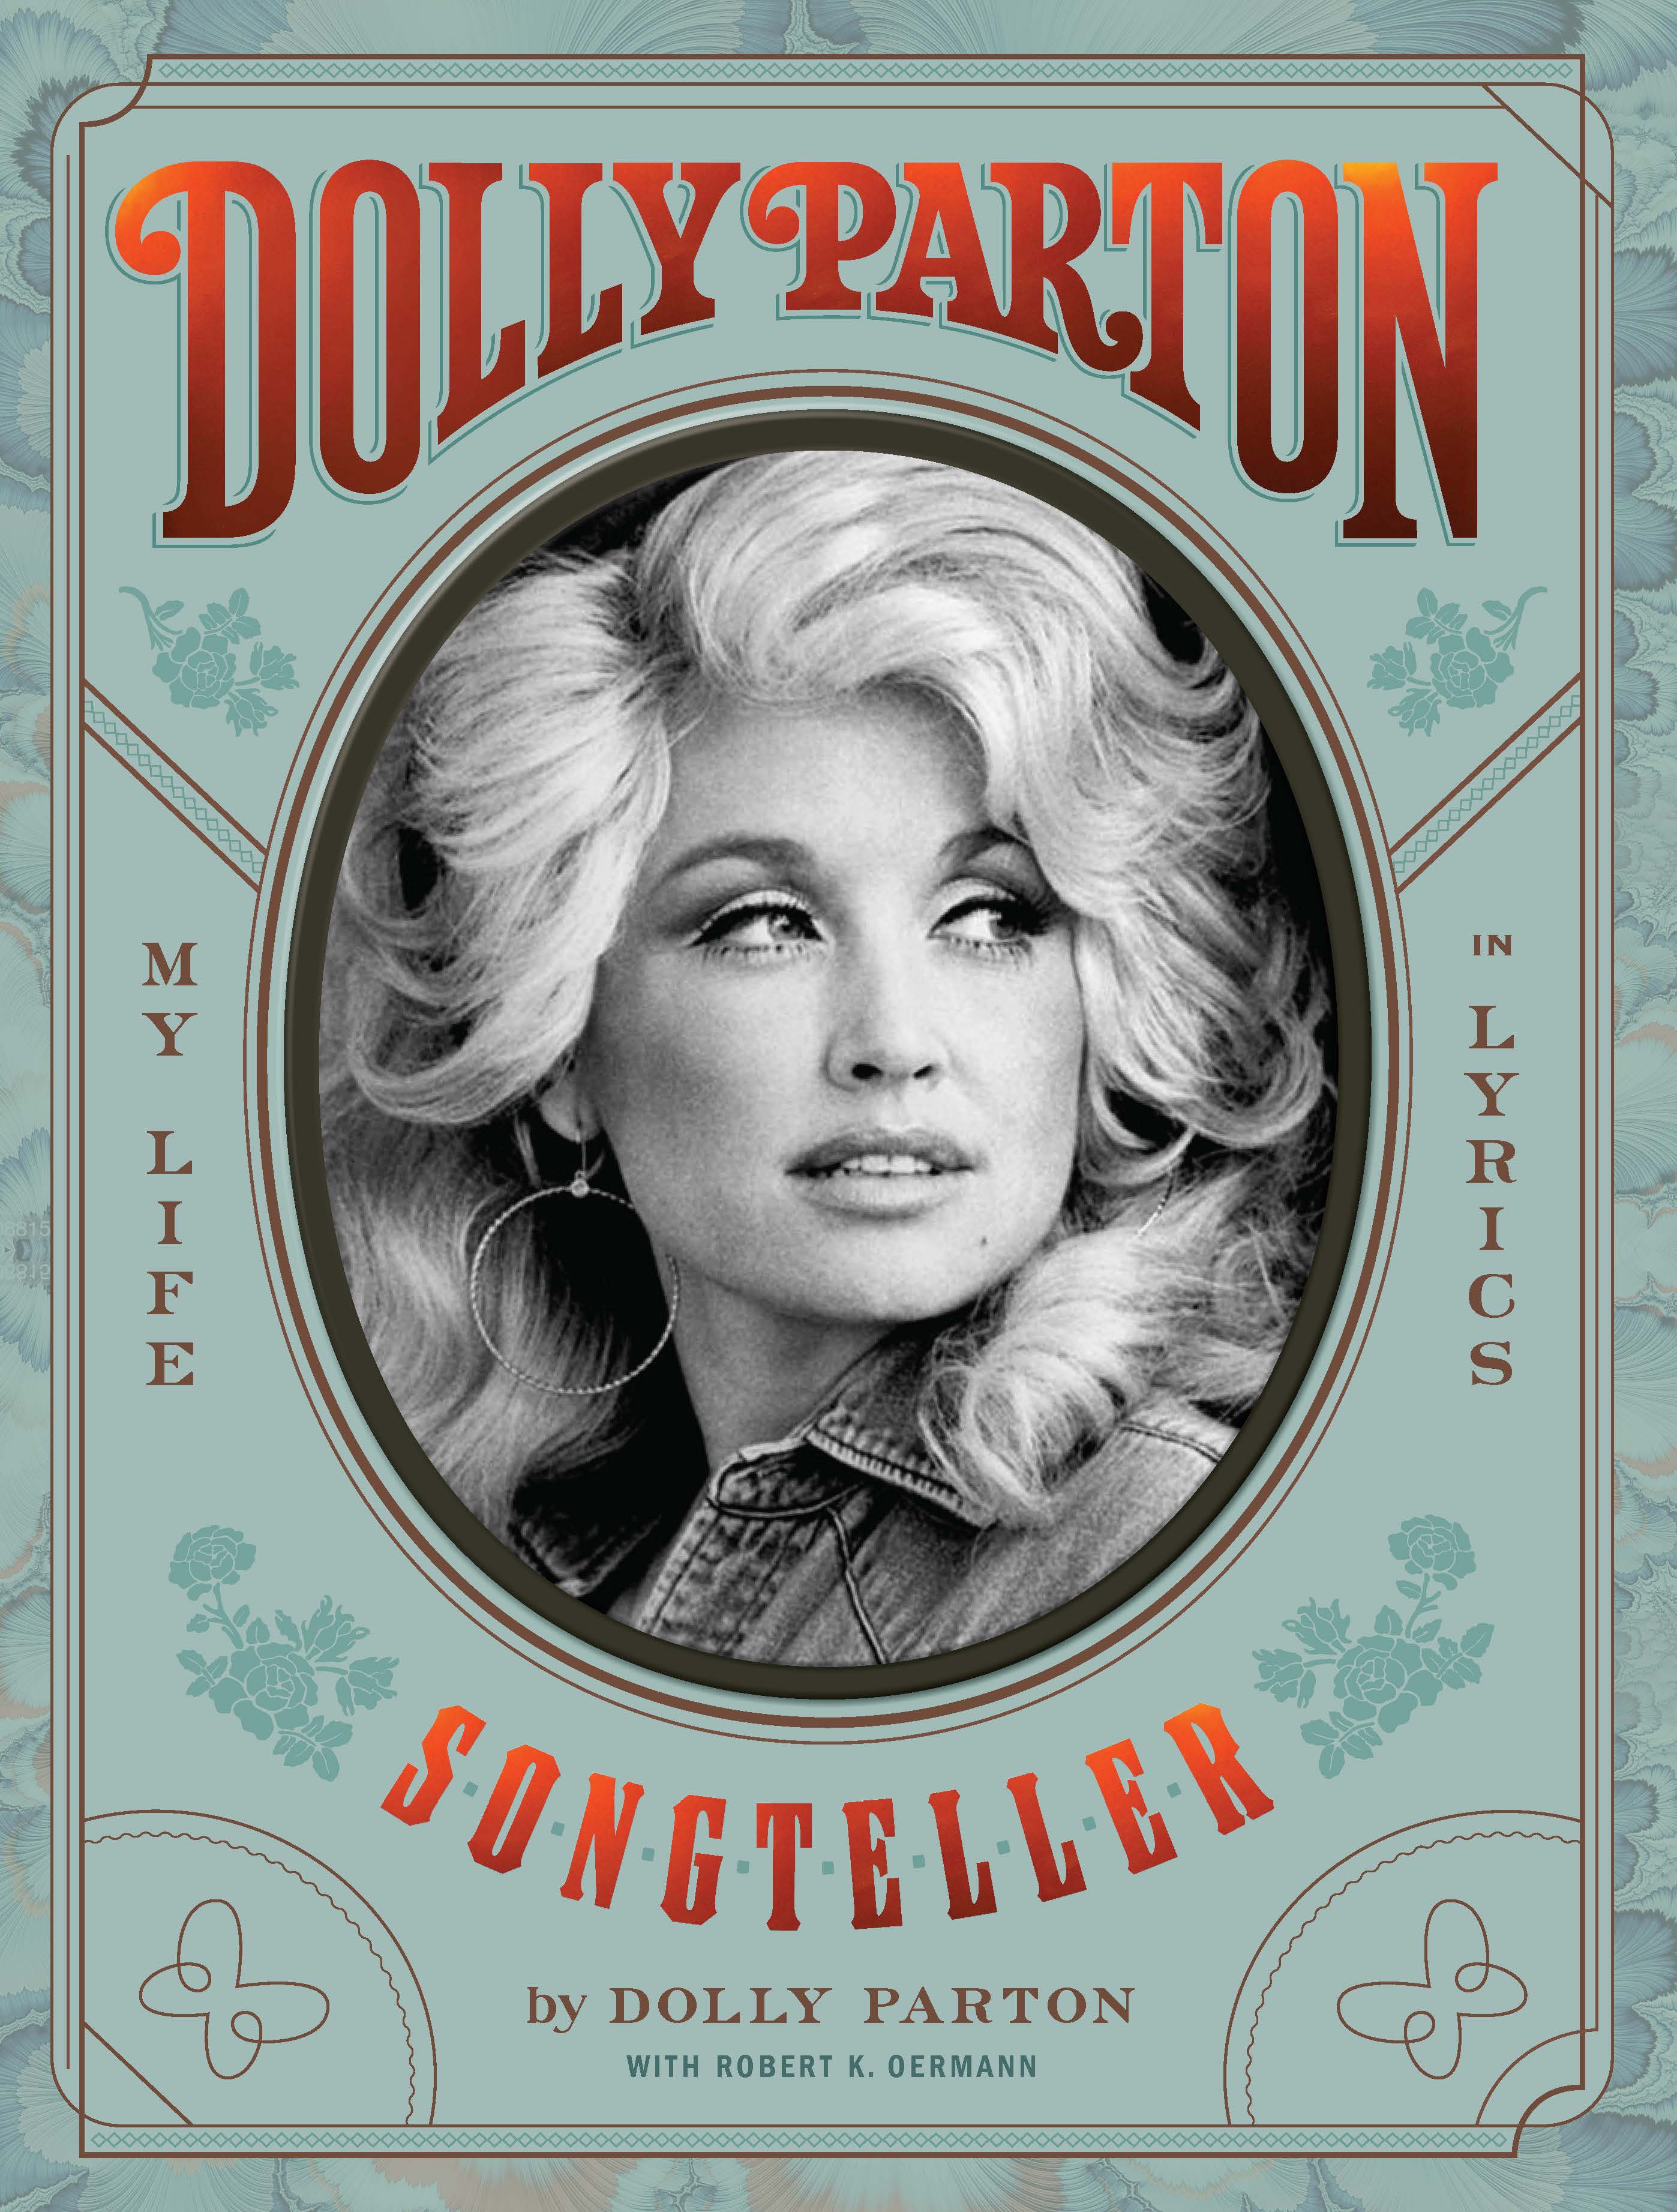 The cover of Dolly Parton's book "Songteller."